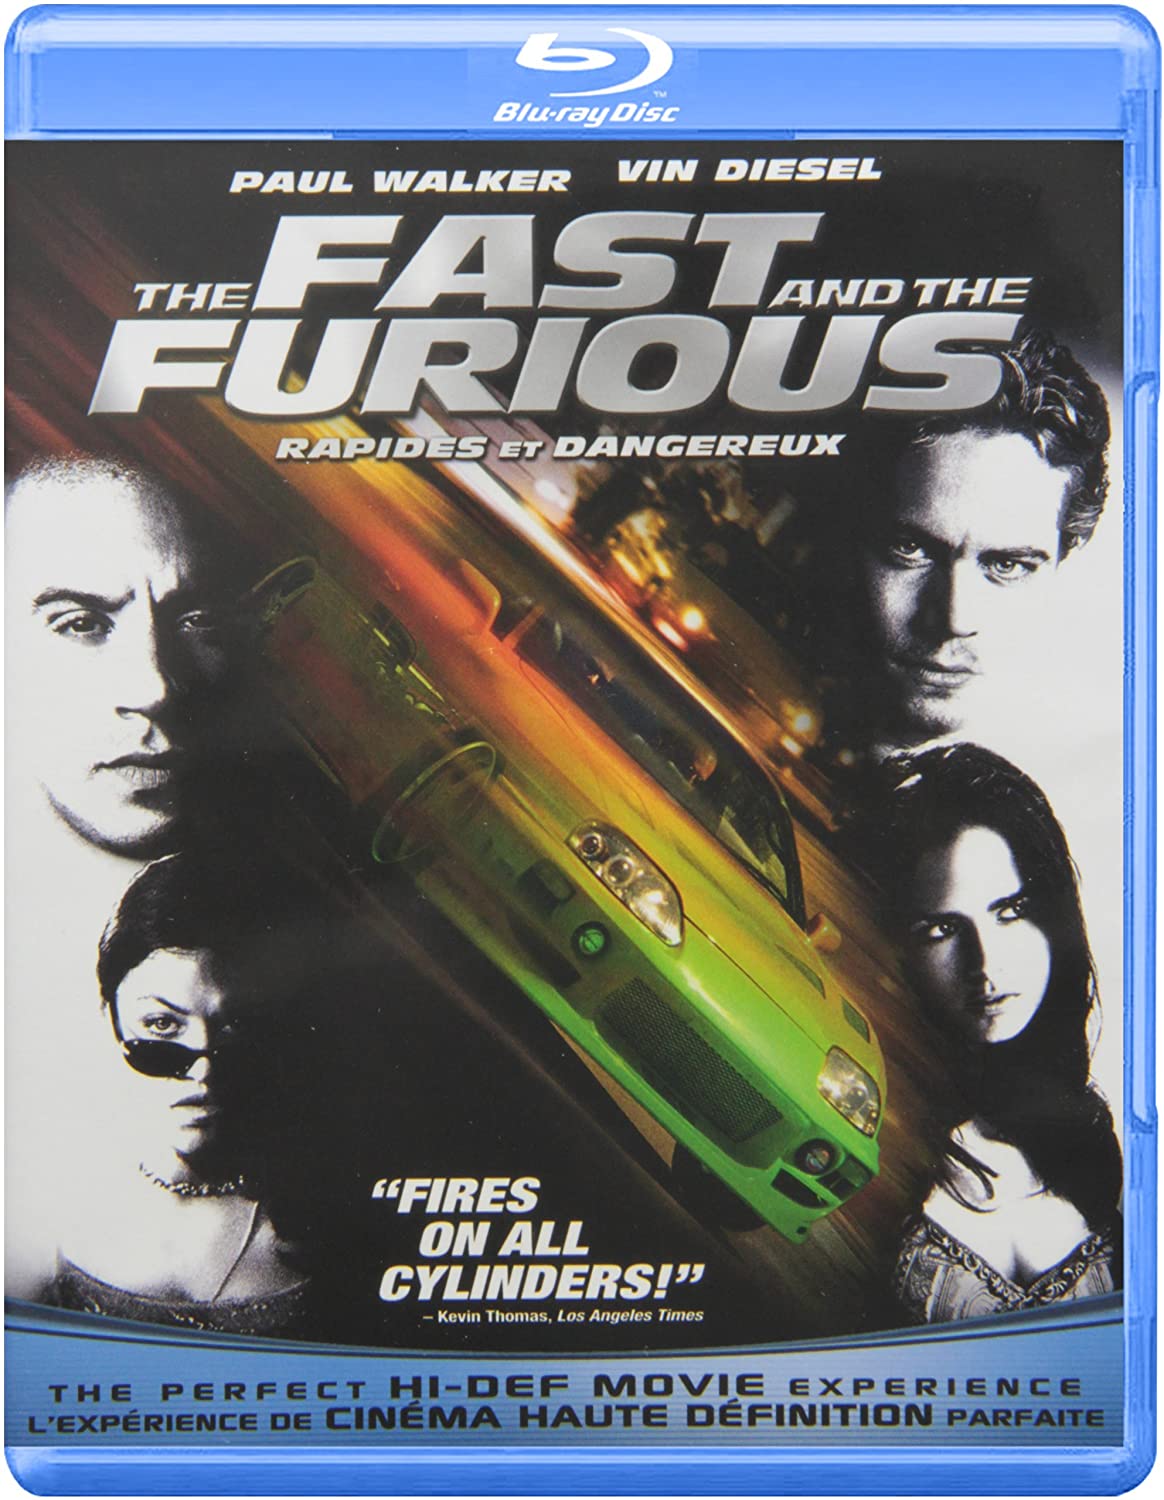 The Fast and the Furious [Blu-ray] (Sous-titres français) [Blu-ray]